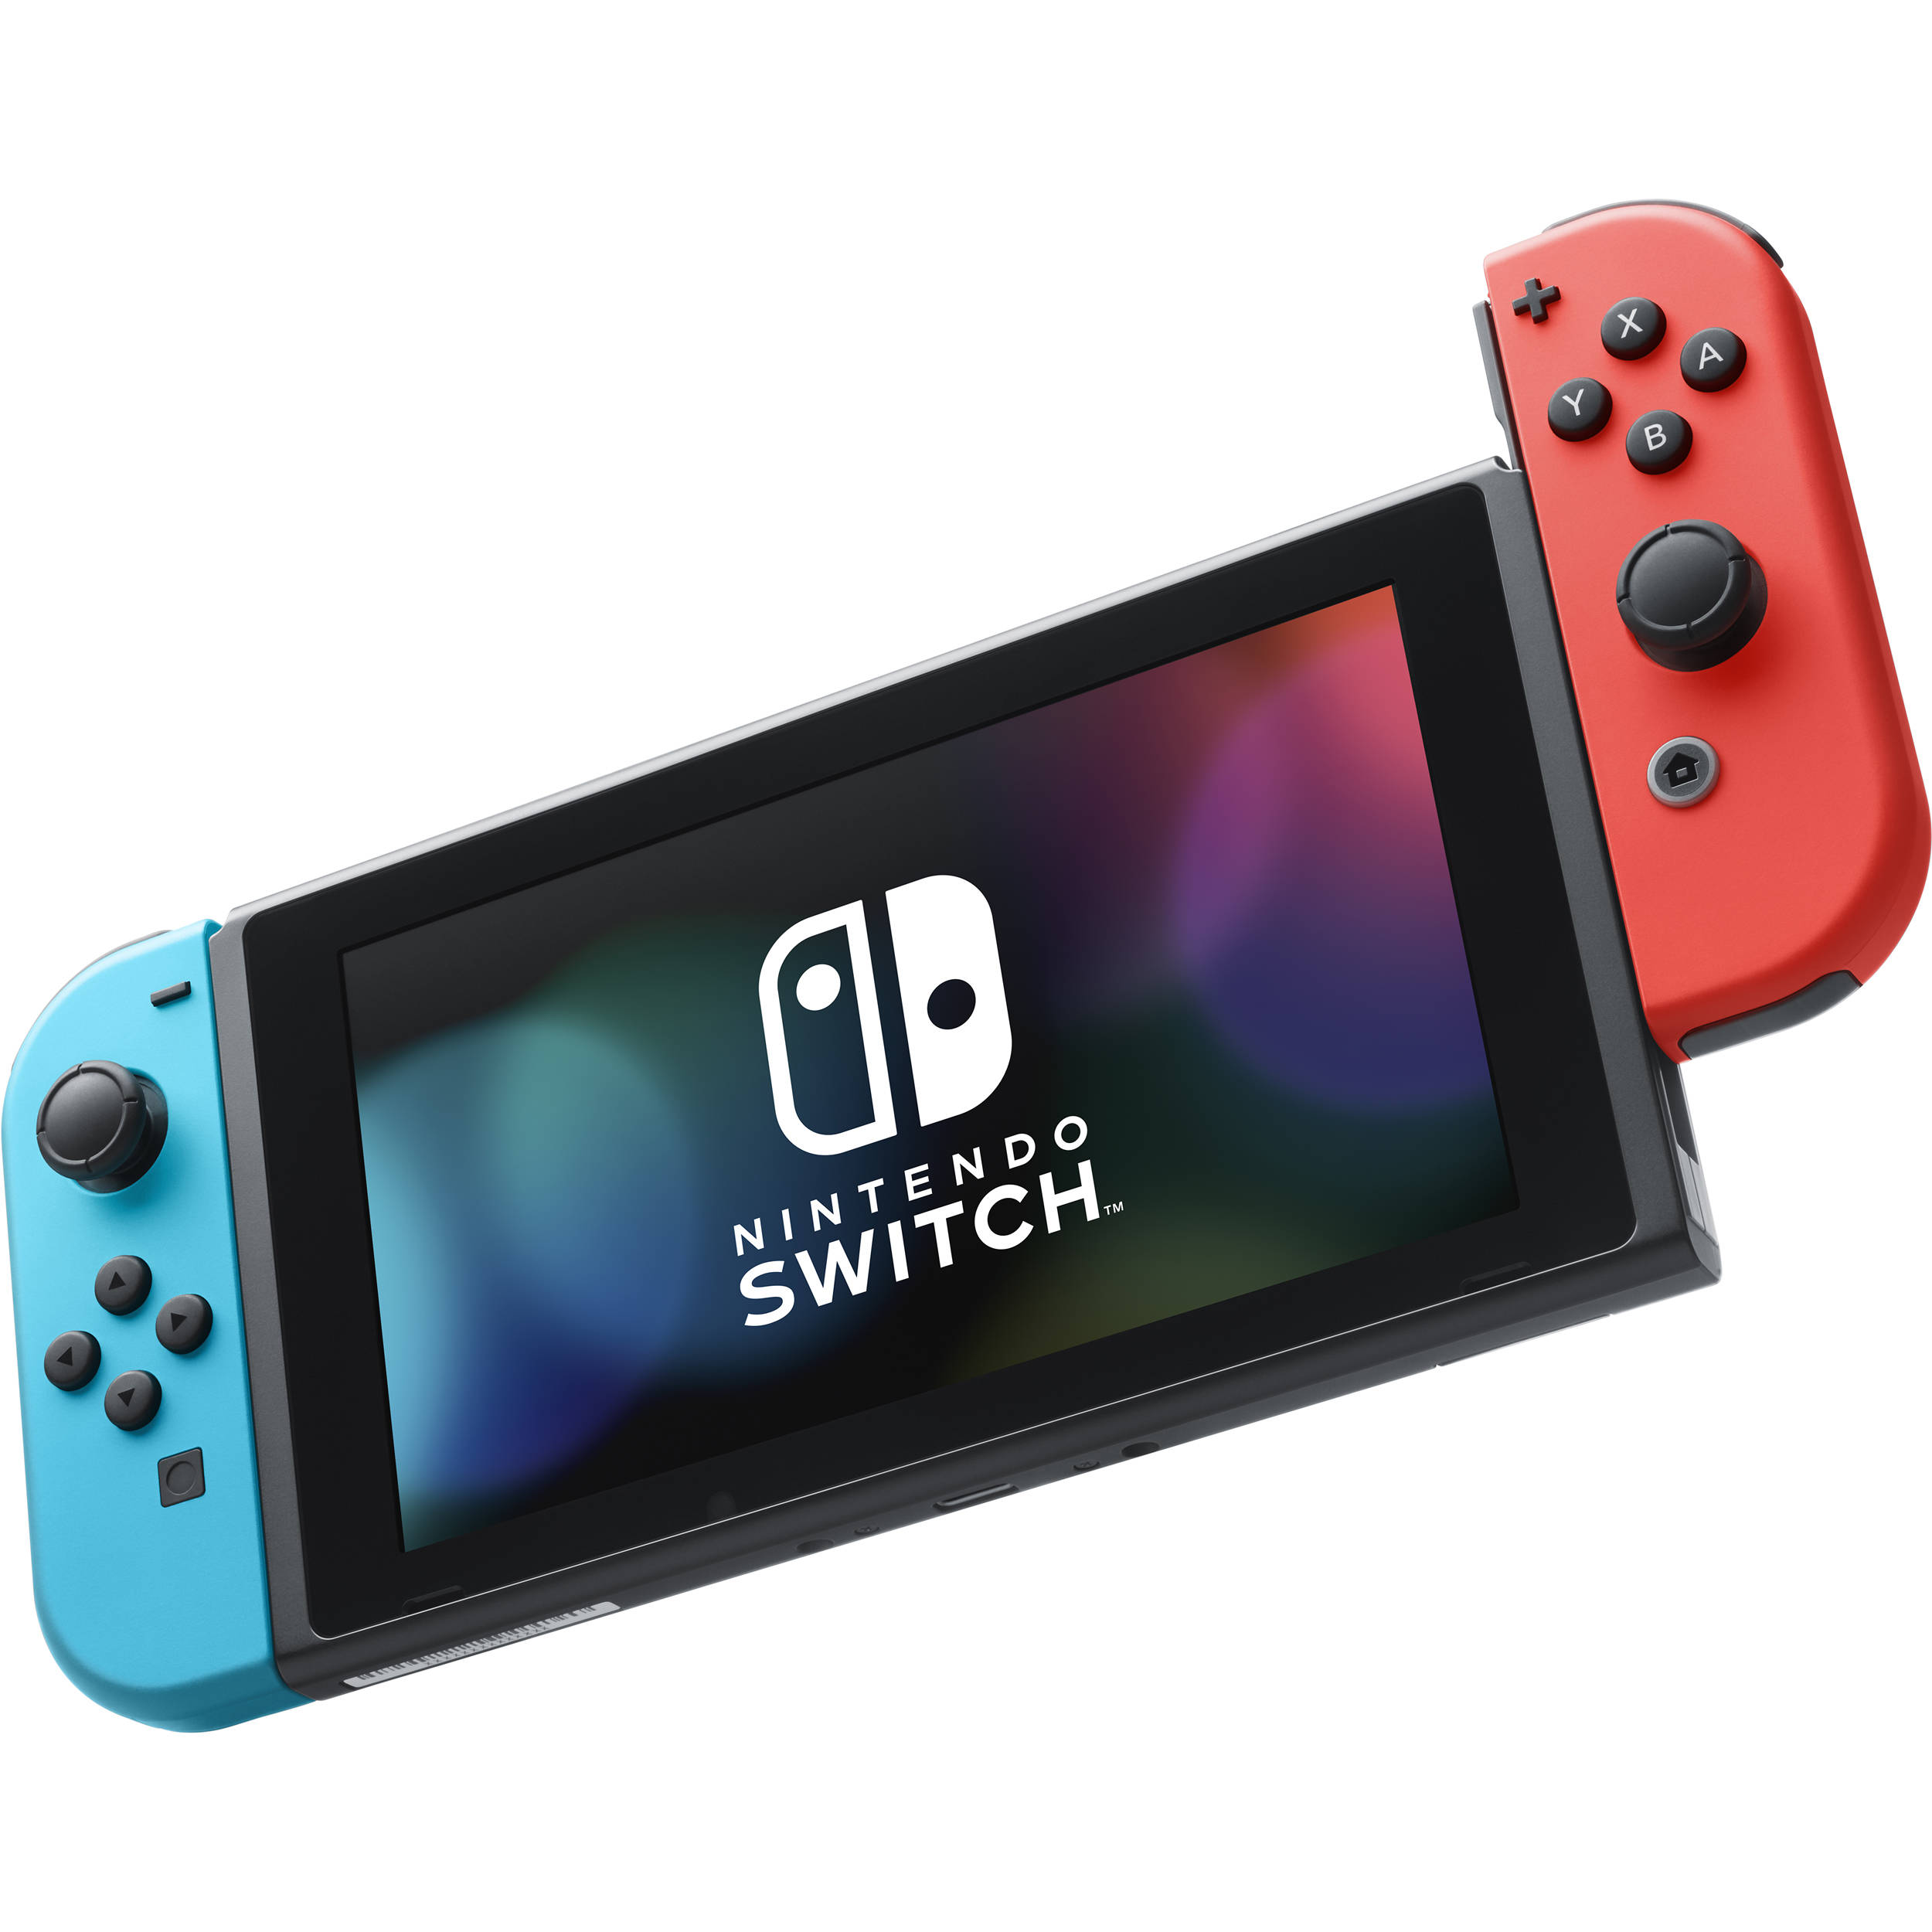 does nintendo switch come with stylus